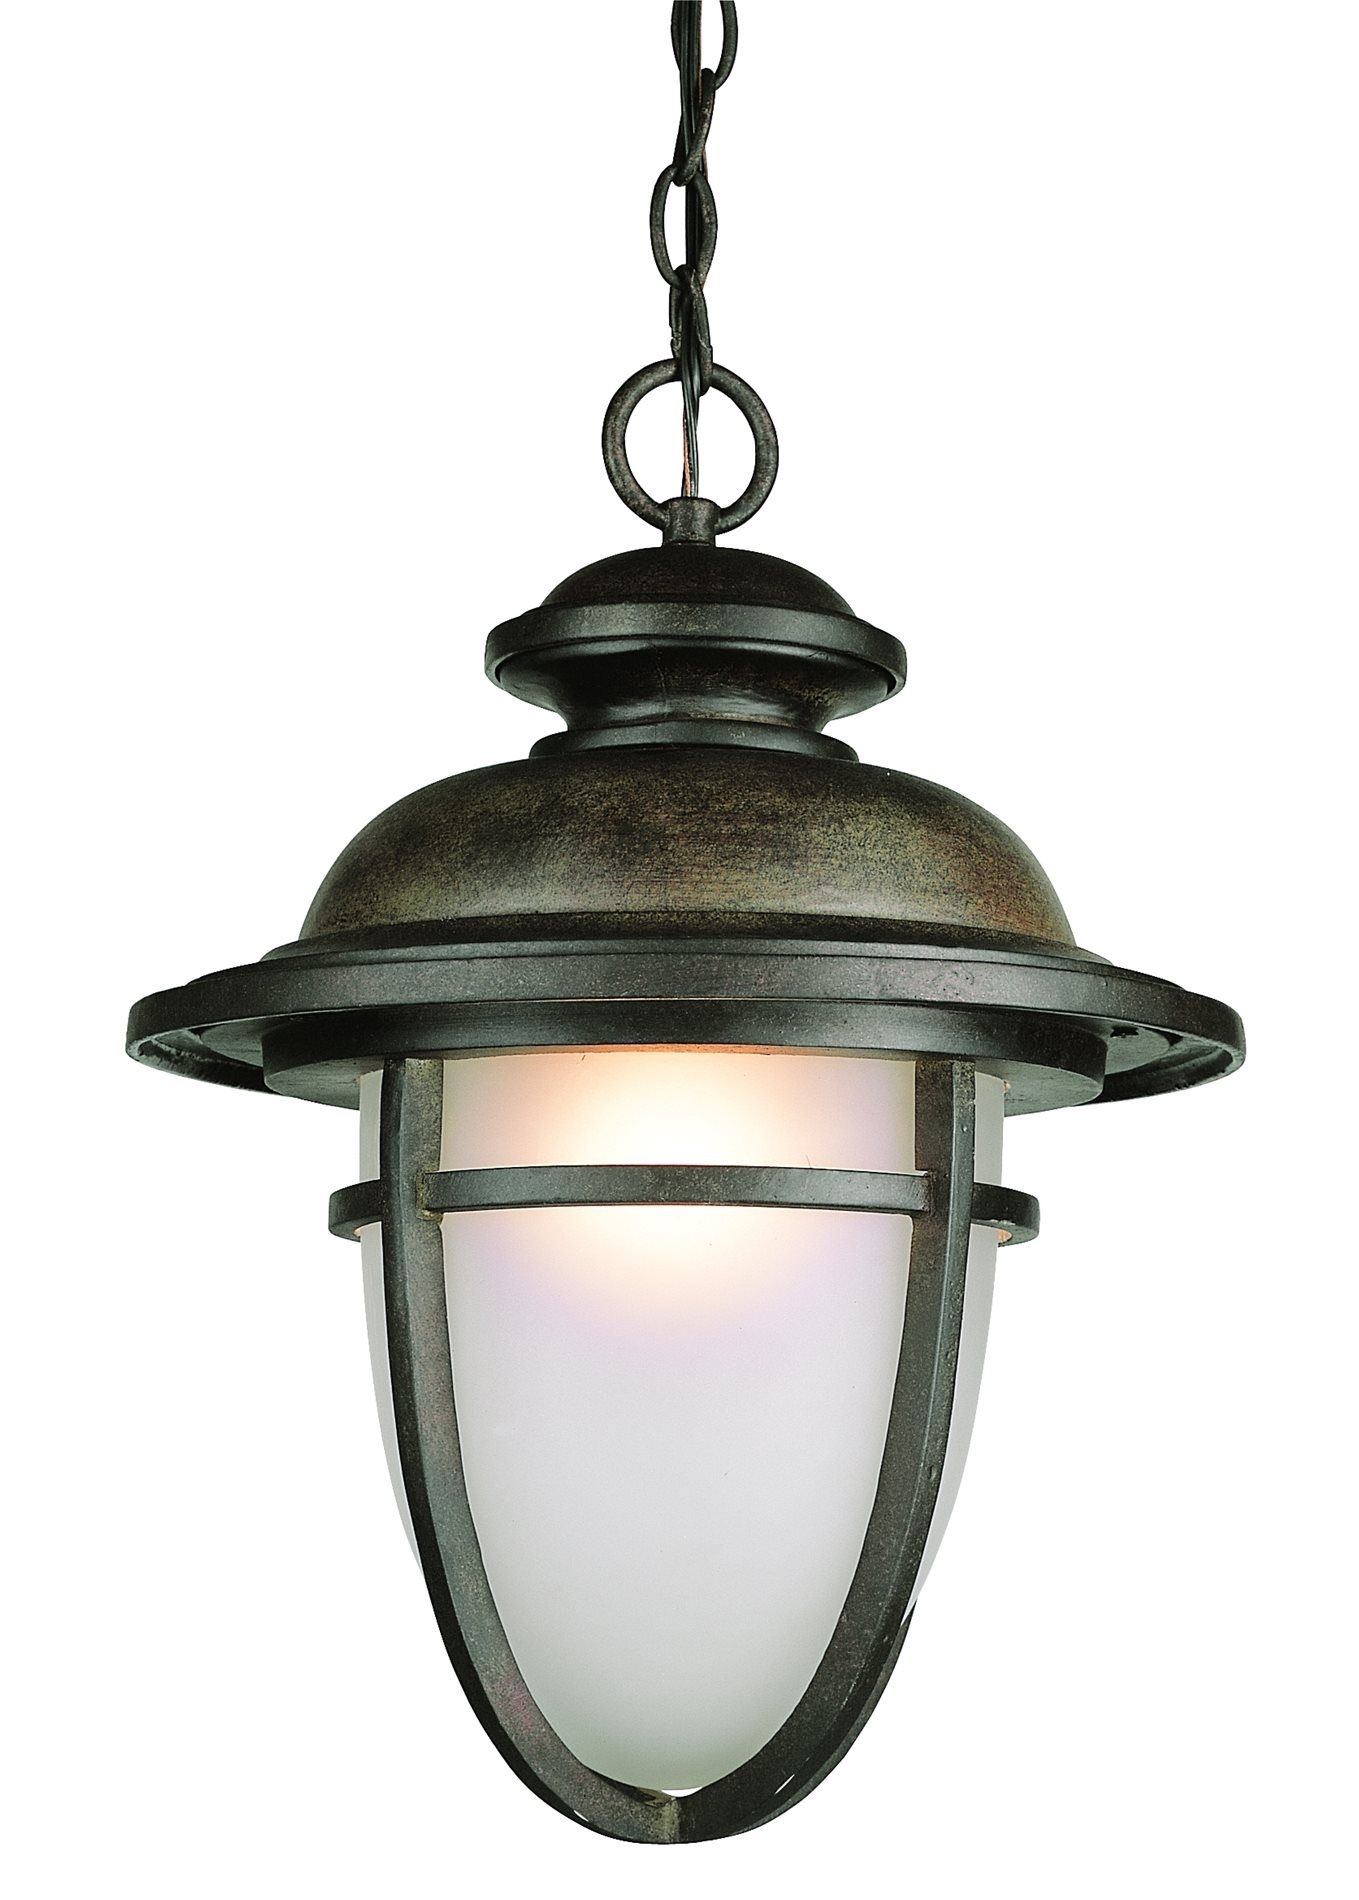 Craftsman And Traditional Detailing Draw The Eye In To This Trans Within Houzz Outdoor Hanging Lights (View 2 of 15)